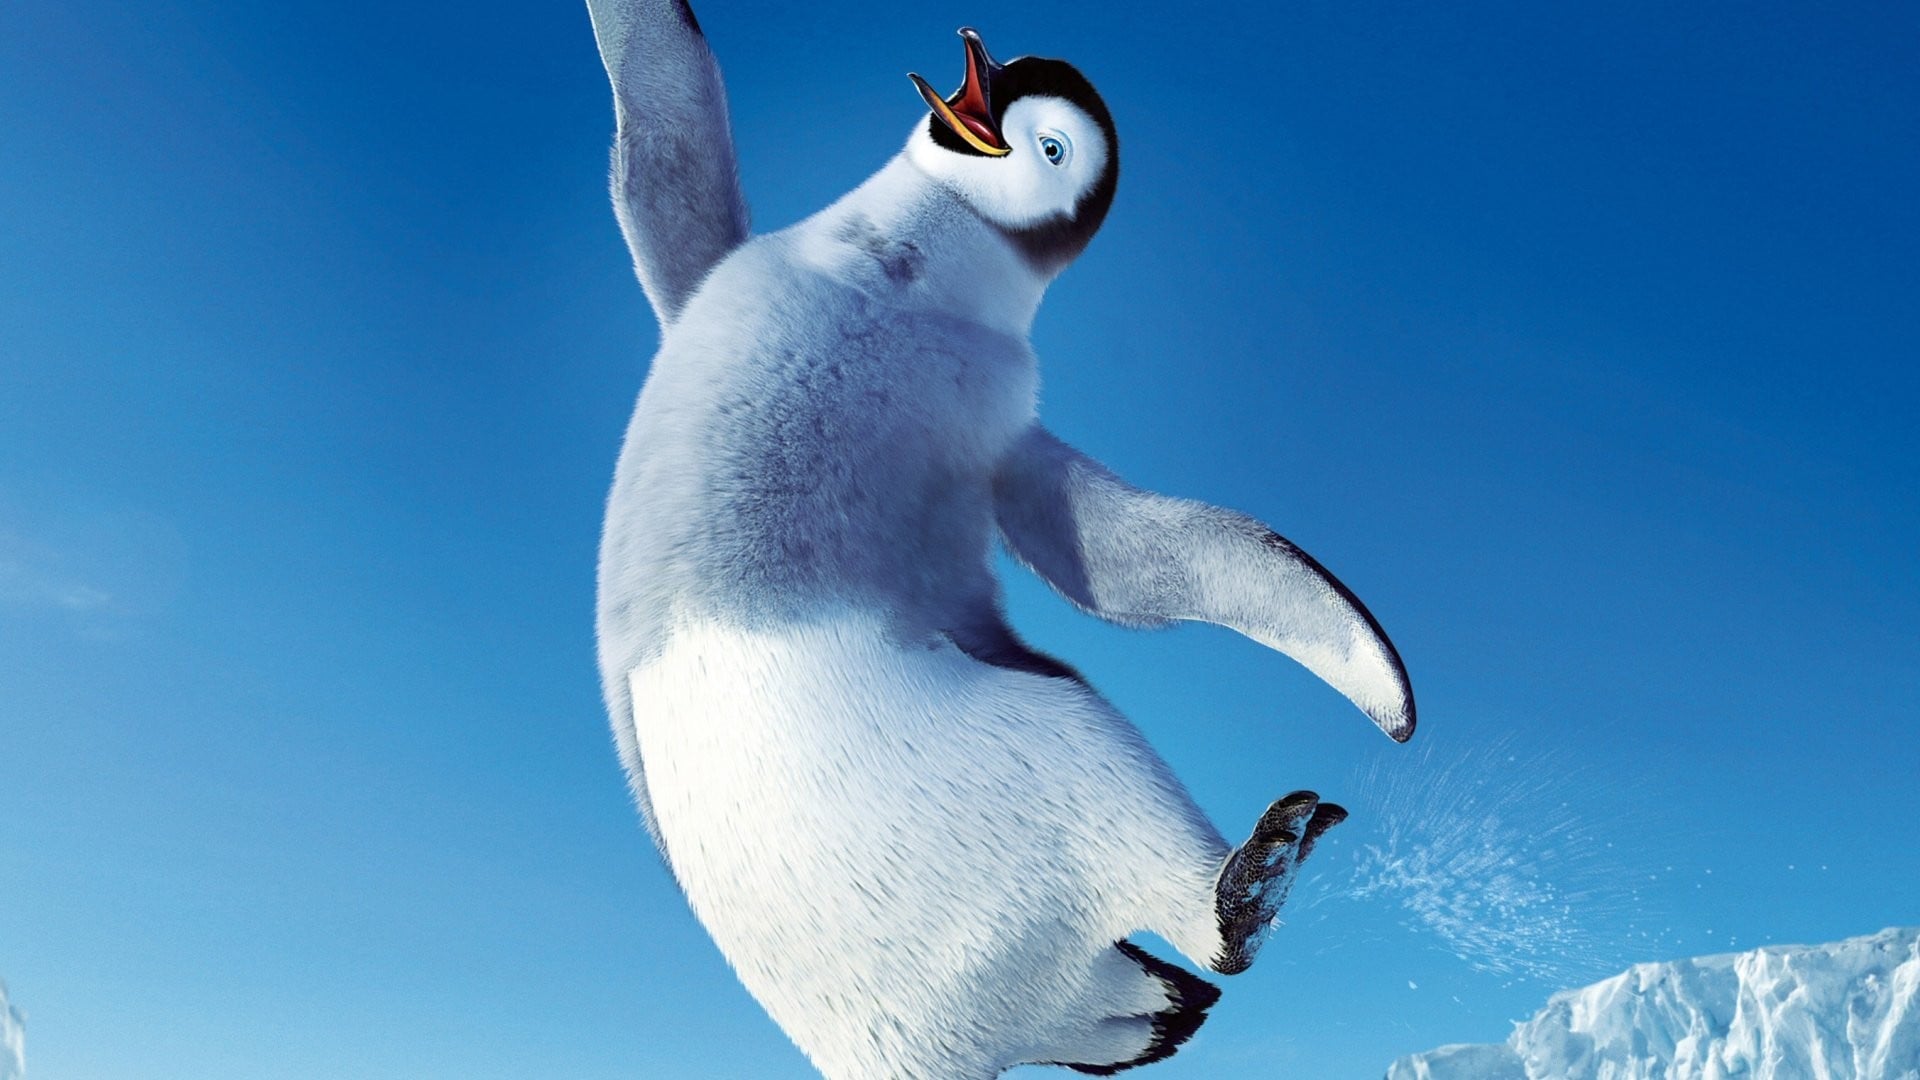 Happy Feet Wallpapers High Quality | Download Free